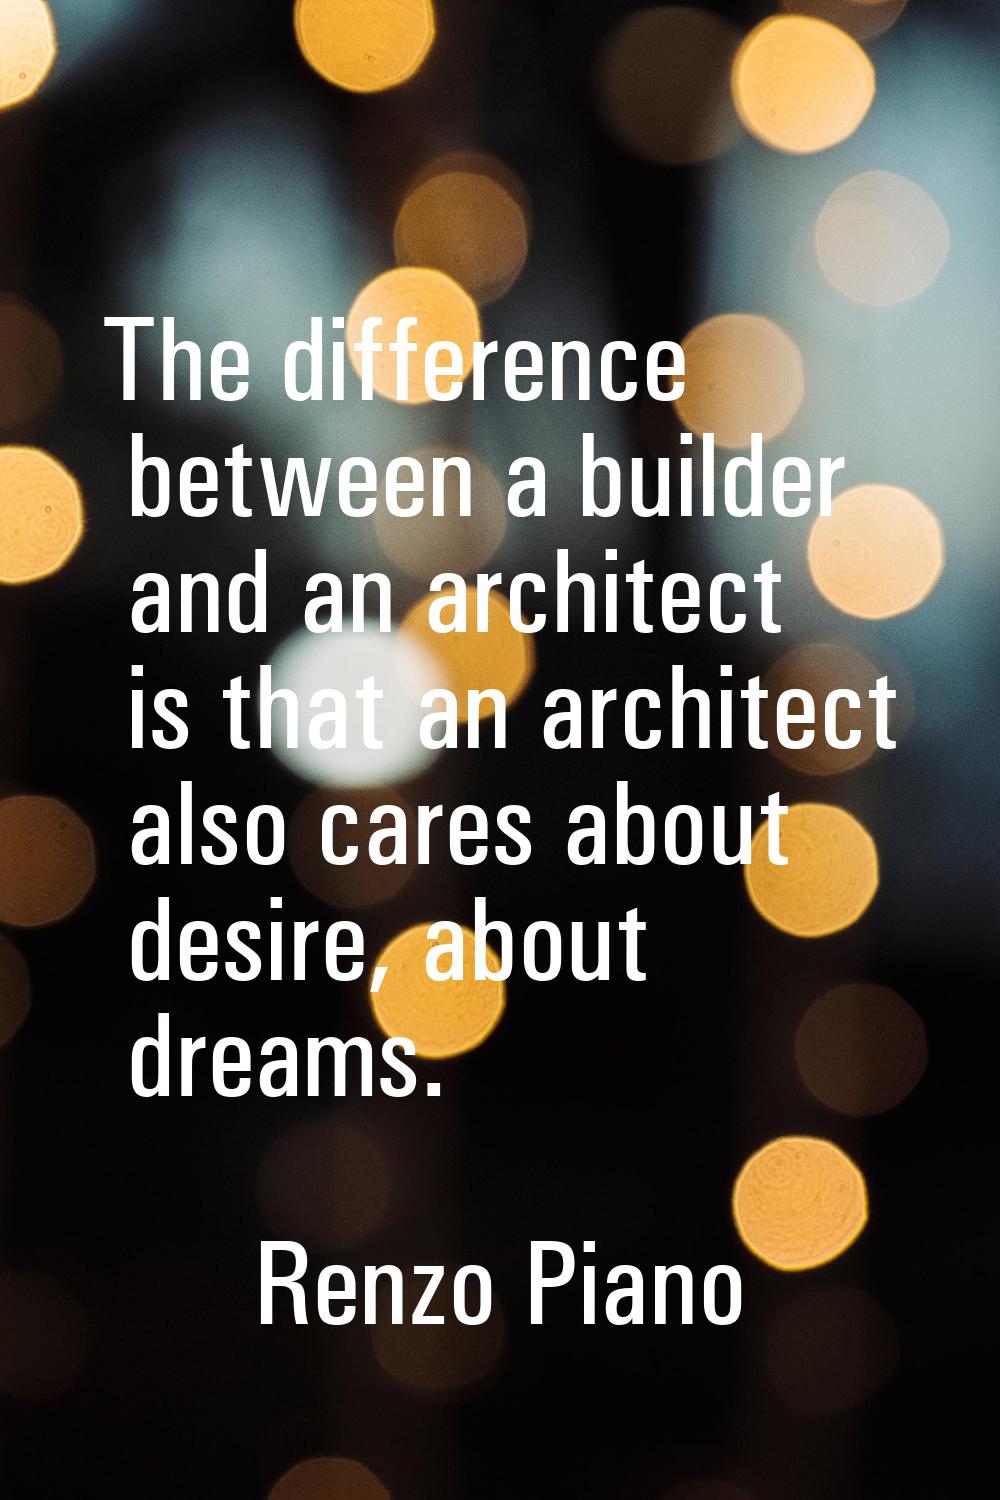 The difference between a builder and an architect is that an architect also cares about desire, abo